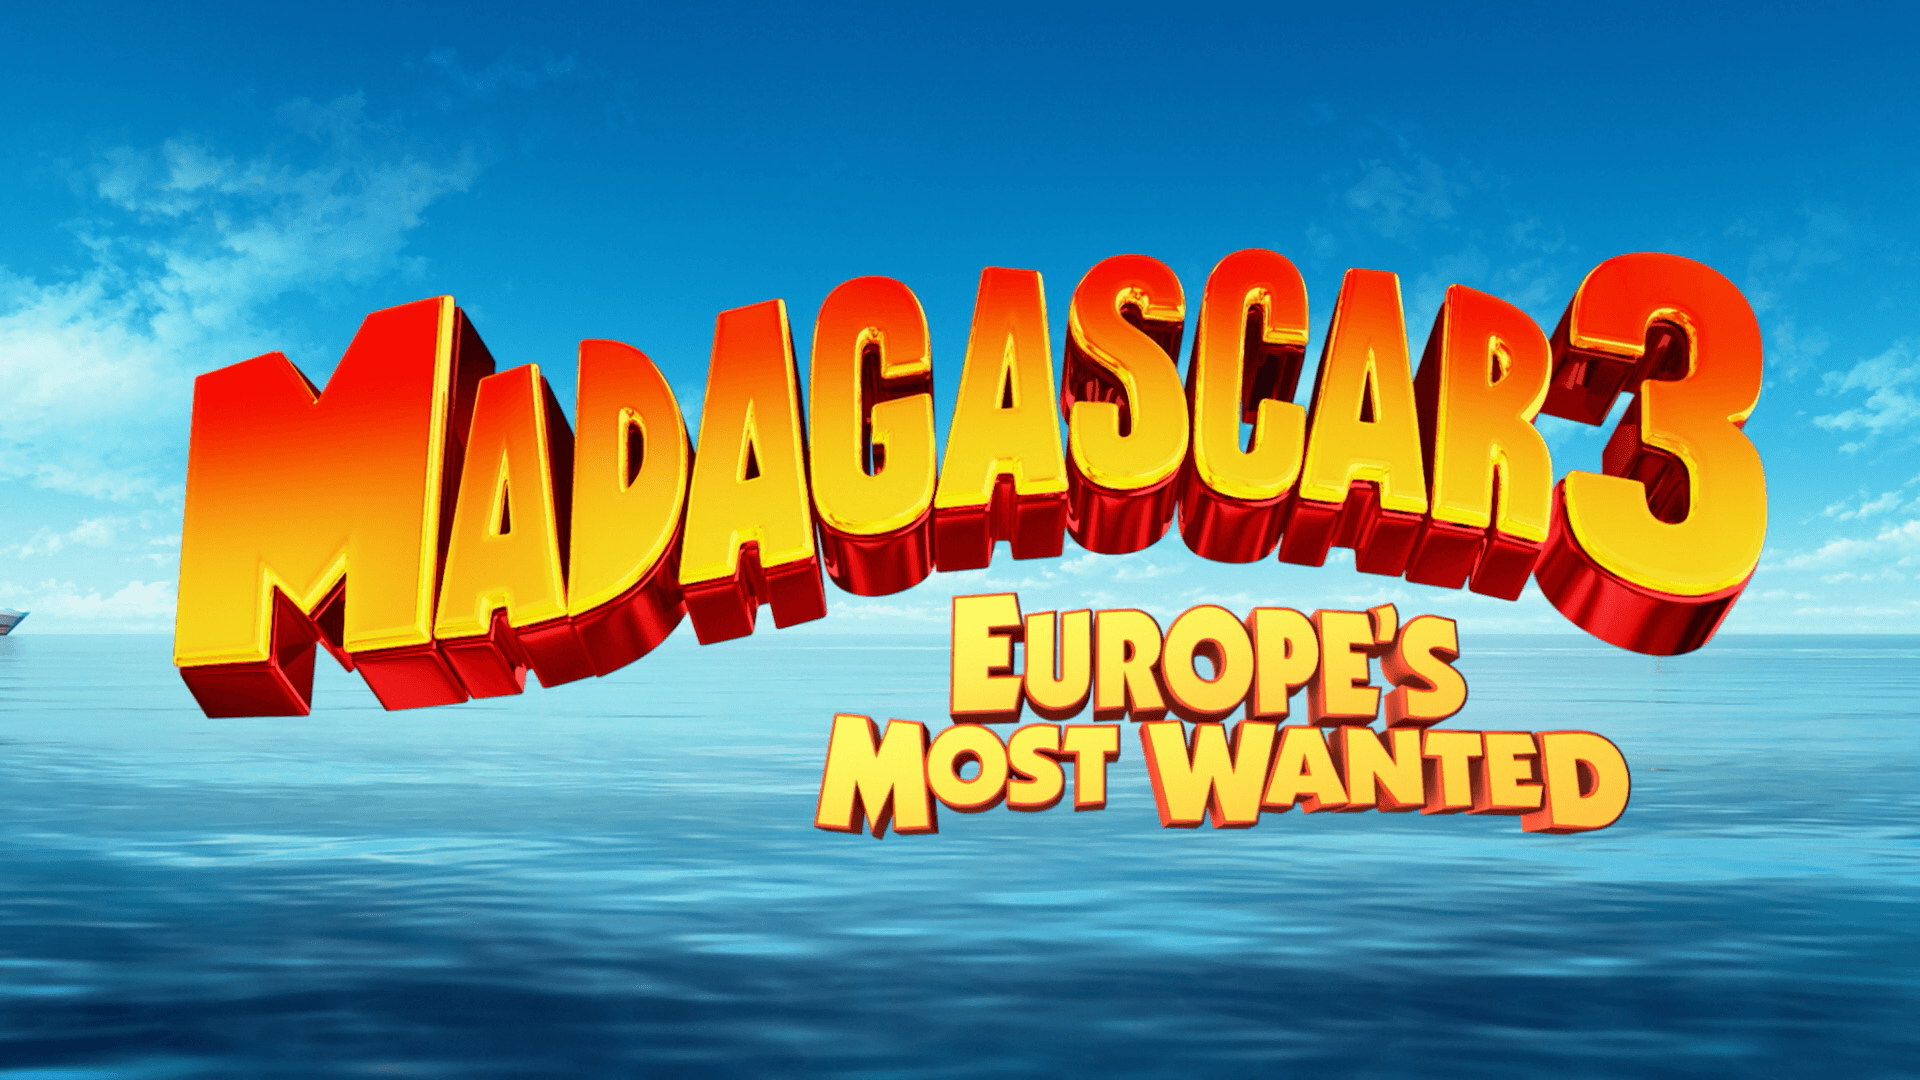 Dreamworks Madagascar Logo - Madagascar 3: Europe's Most Wanted (Blu-ray) : DVD Talk Review of ...